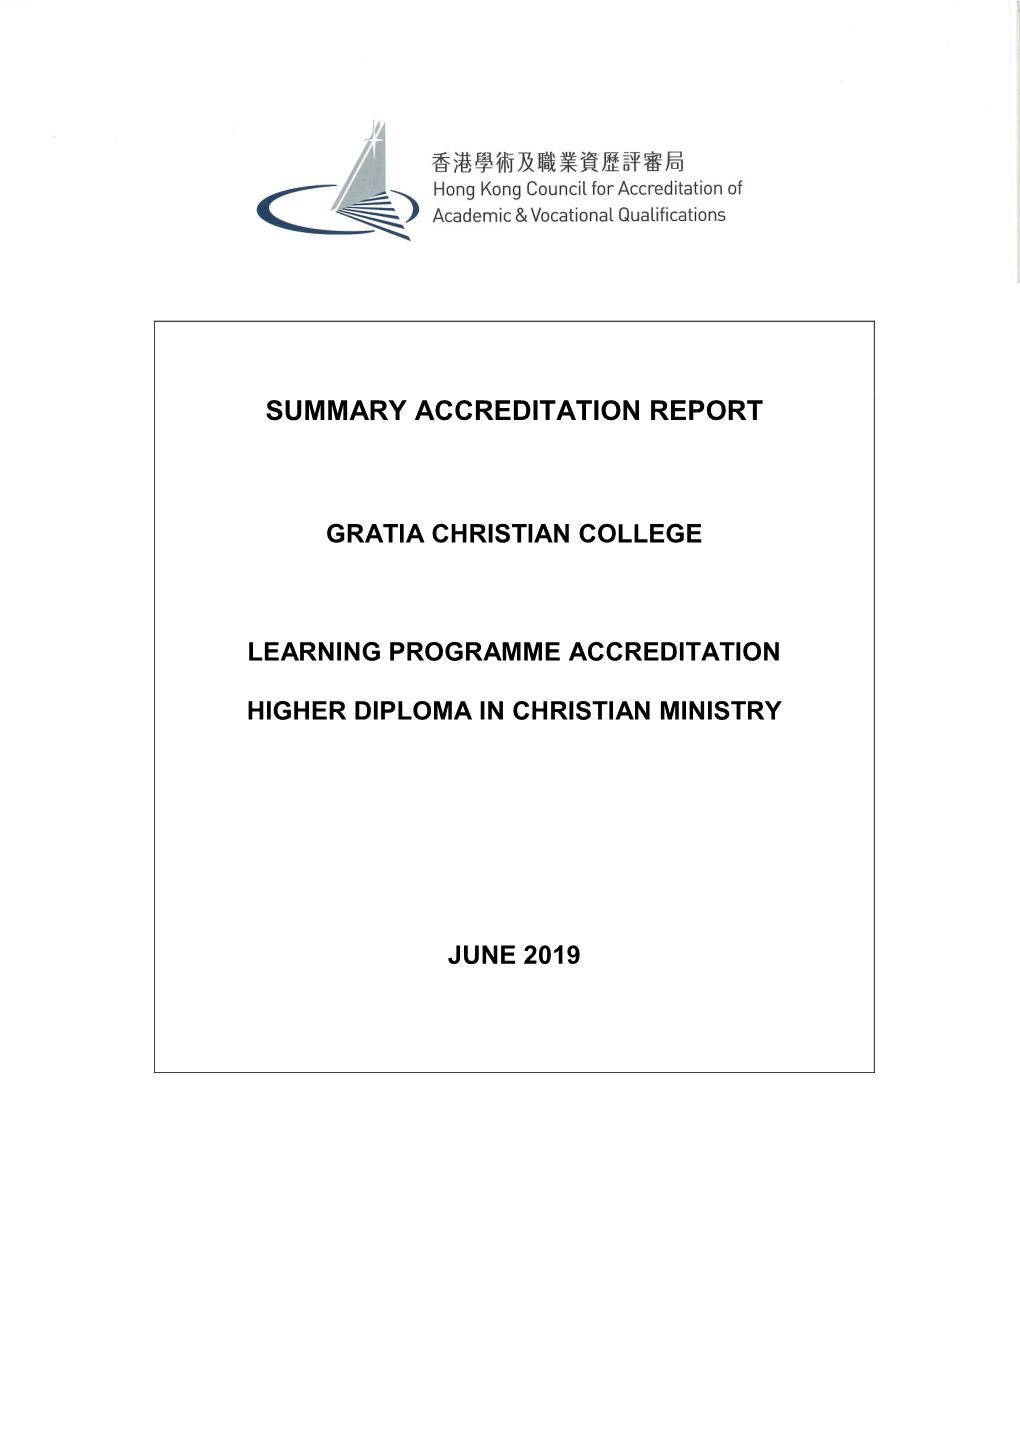 Gratia Christian College Learning Programme Accreditation Higher